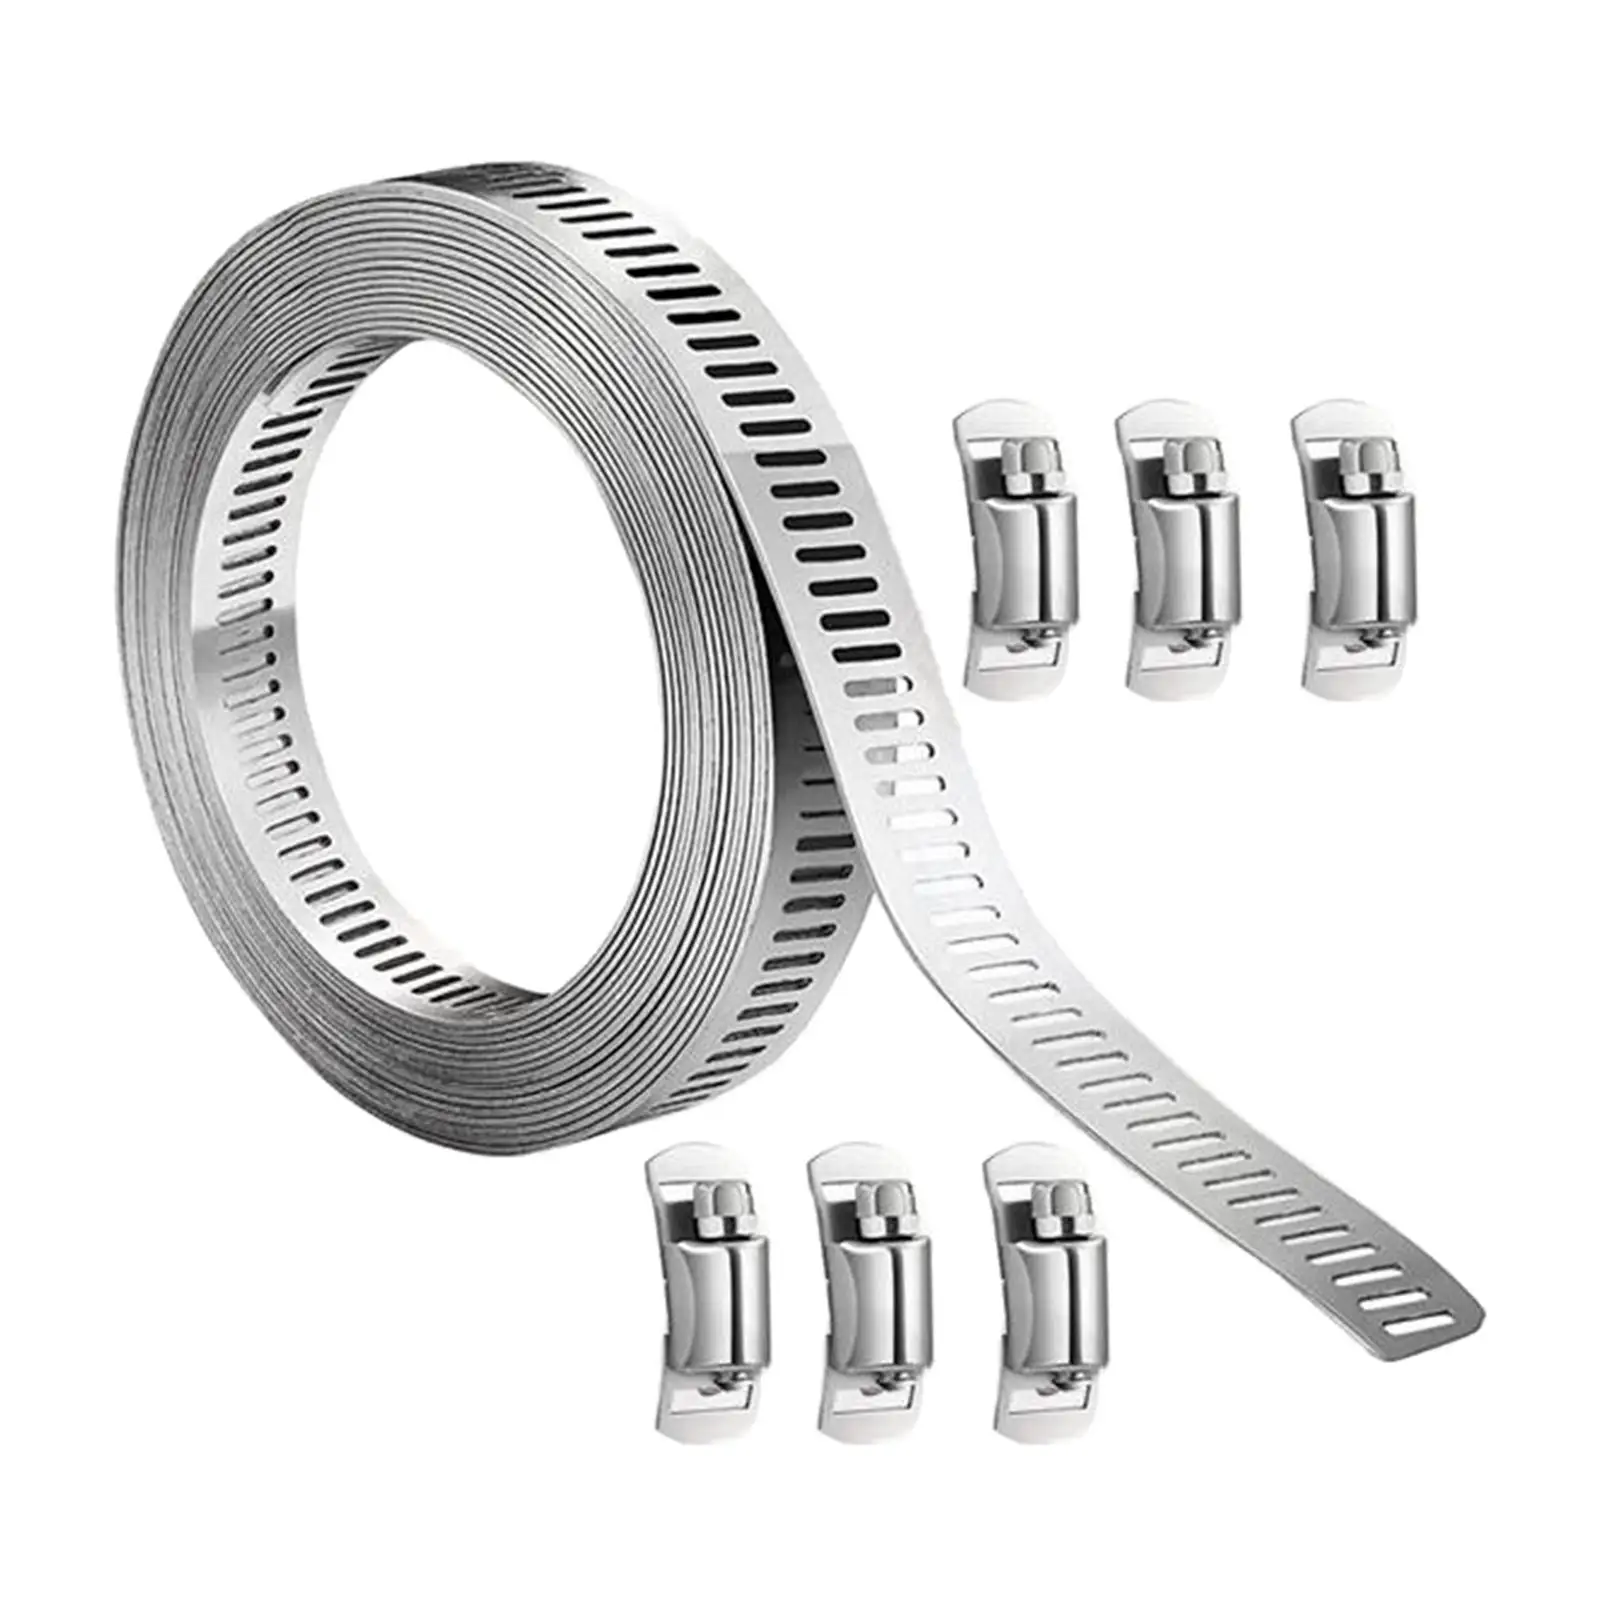 Hose Clamp Adjustable with 8Pcs Fasteners assortment kits Waterproof Ducting Clamp Worm Gear Hose Clamp for Water Pipe Machinery